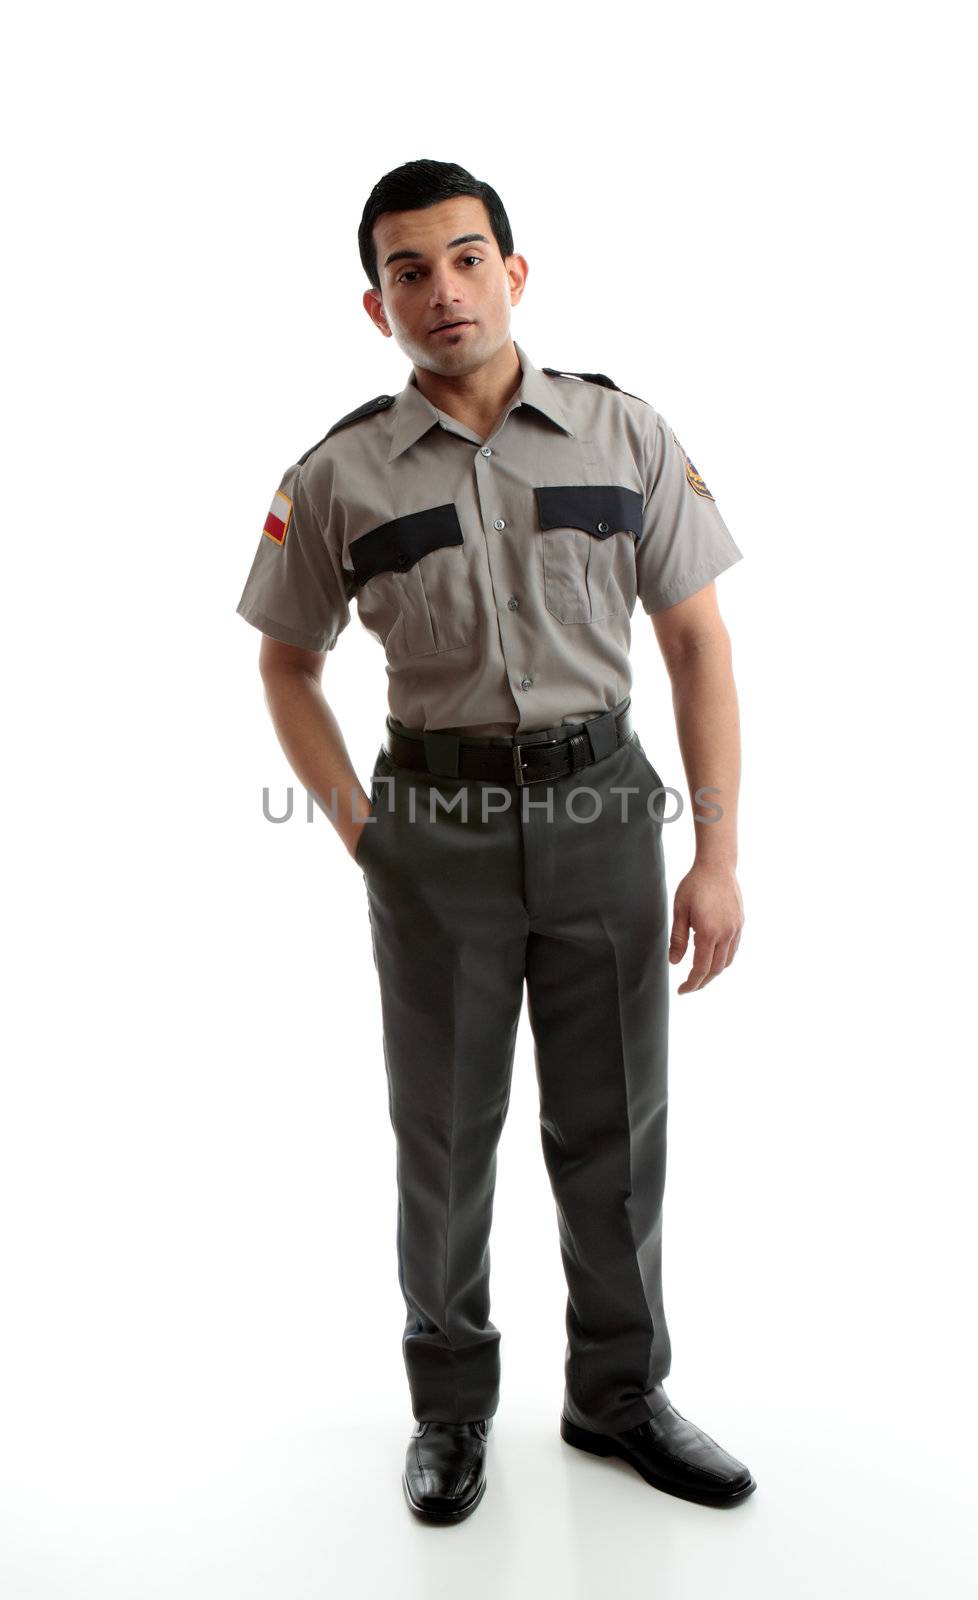 A male worker wearing uniform is standing with one hand in pocket on a white background